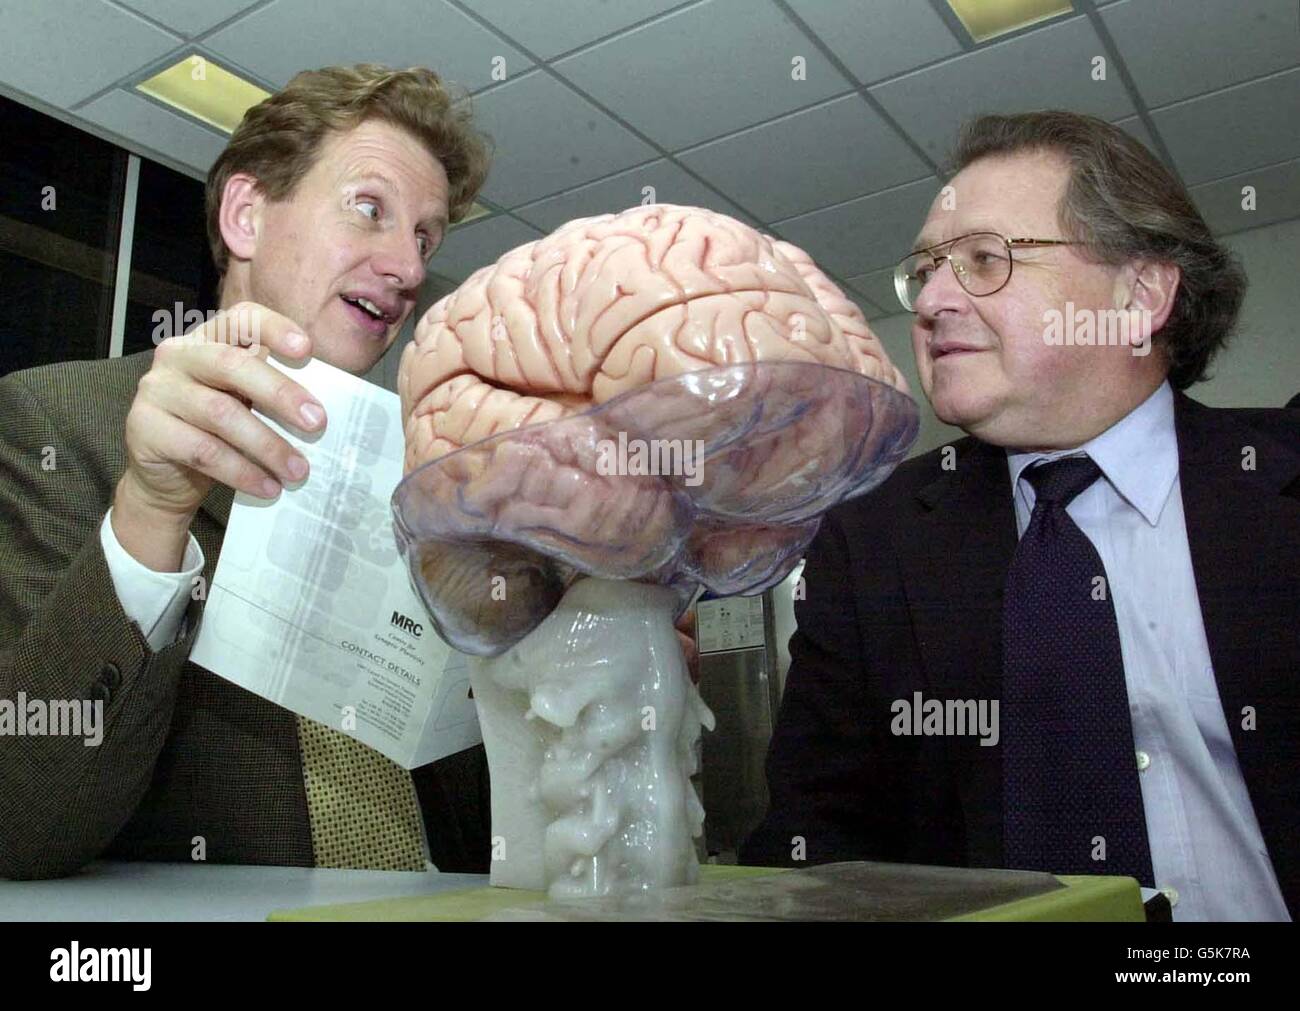 Professor Graham Collingridge (left), Director of the Medical Research Council (MRC) Centre for Synaptic Plasticity and Professor Sir George Radda, Chief Executive of Medical Research Council with a model of a brain after the official launch of the Centre. * at the University of Bristol's School of Medical Sciences. Stock Photo